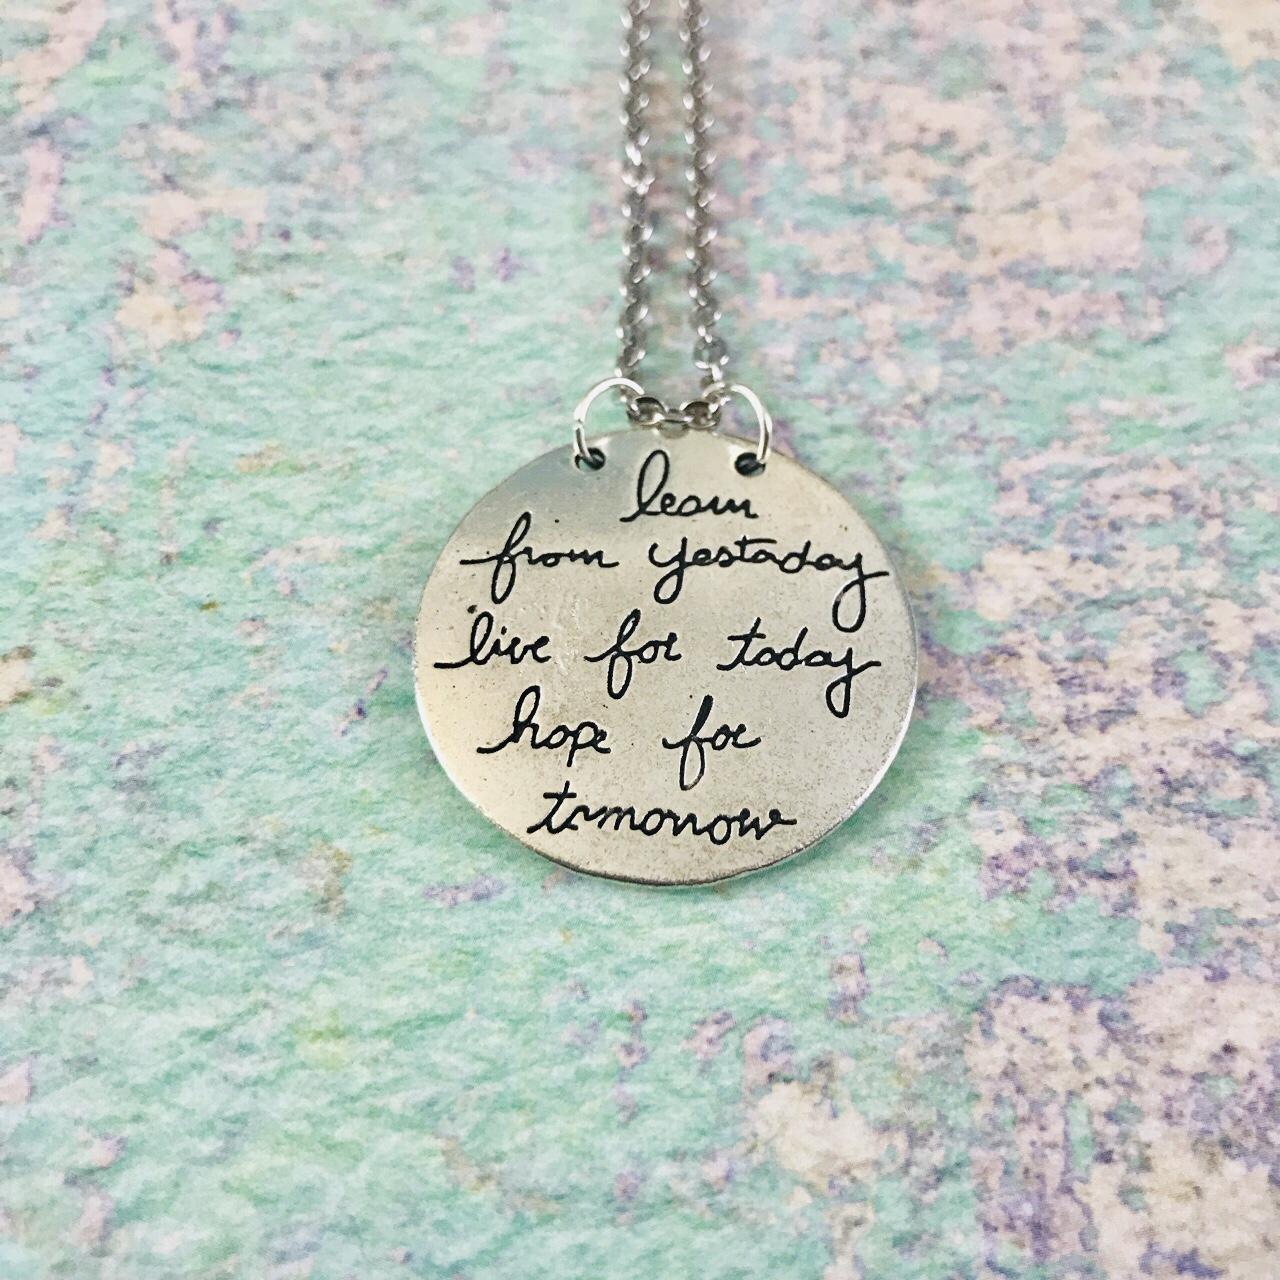 We will be friends until forever. Just you wait and see. - Winnie the Pooh  Inspirational Quote Necklace / Ready to Ship